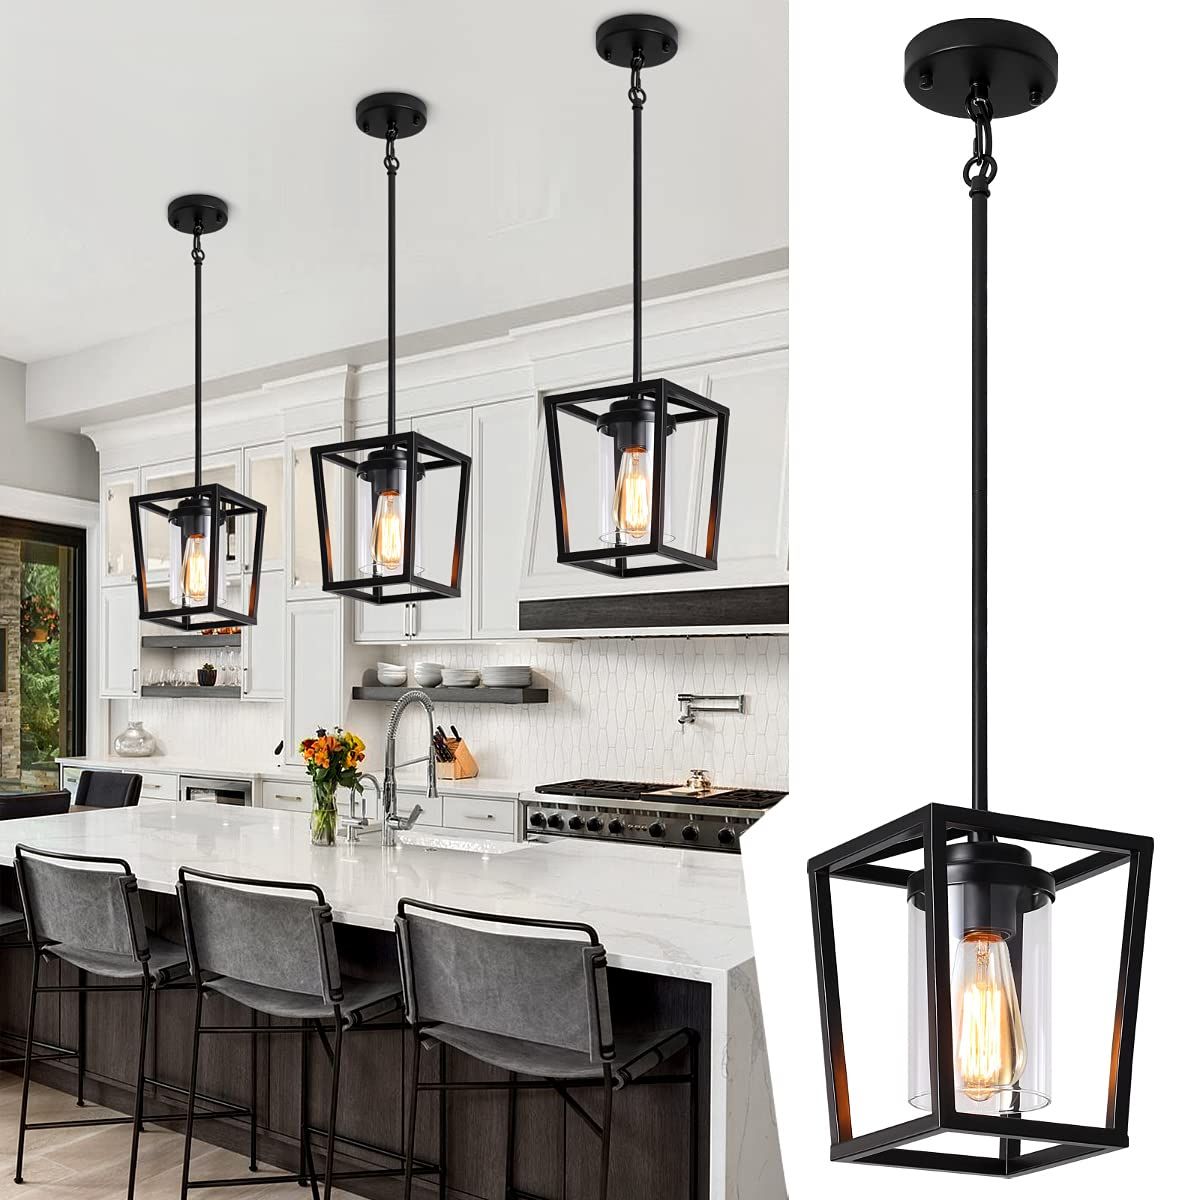 Well Known Clear Glass Shade Lantern Chandeliers In Black Pendant Light For Kitchen Island, 1 Light Farmhouse Industrial Lantern  Pendant Light For Hallway Foyer Dinning Room With Clear Glass Shade,  Adjustable Height – – Amazon (View 6 of 15)